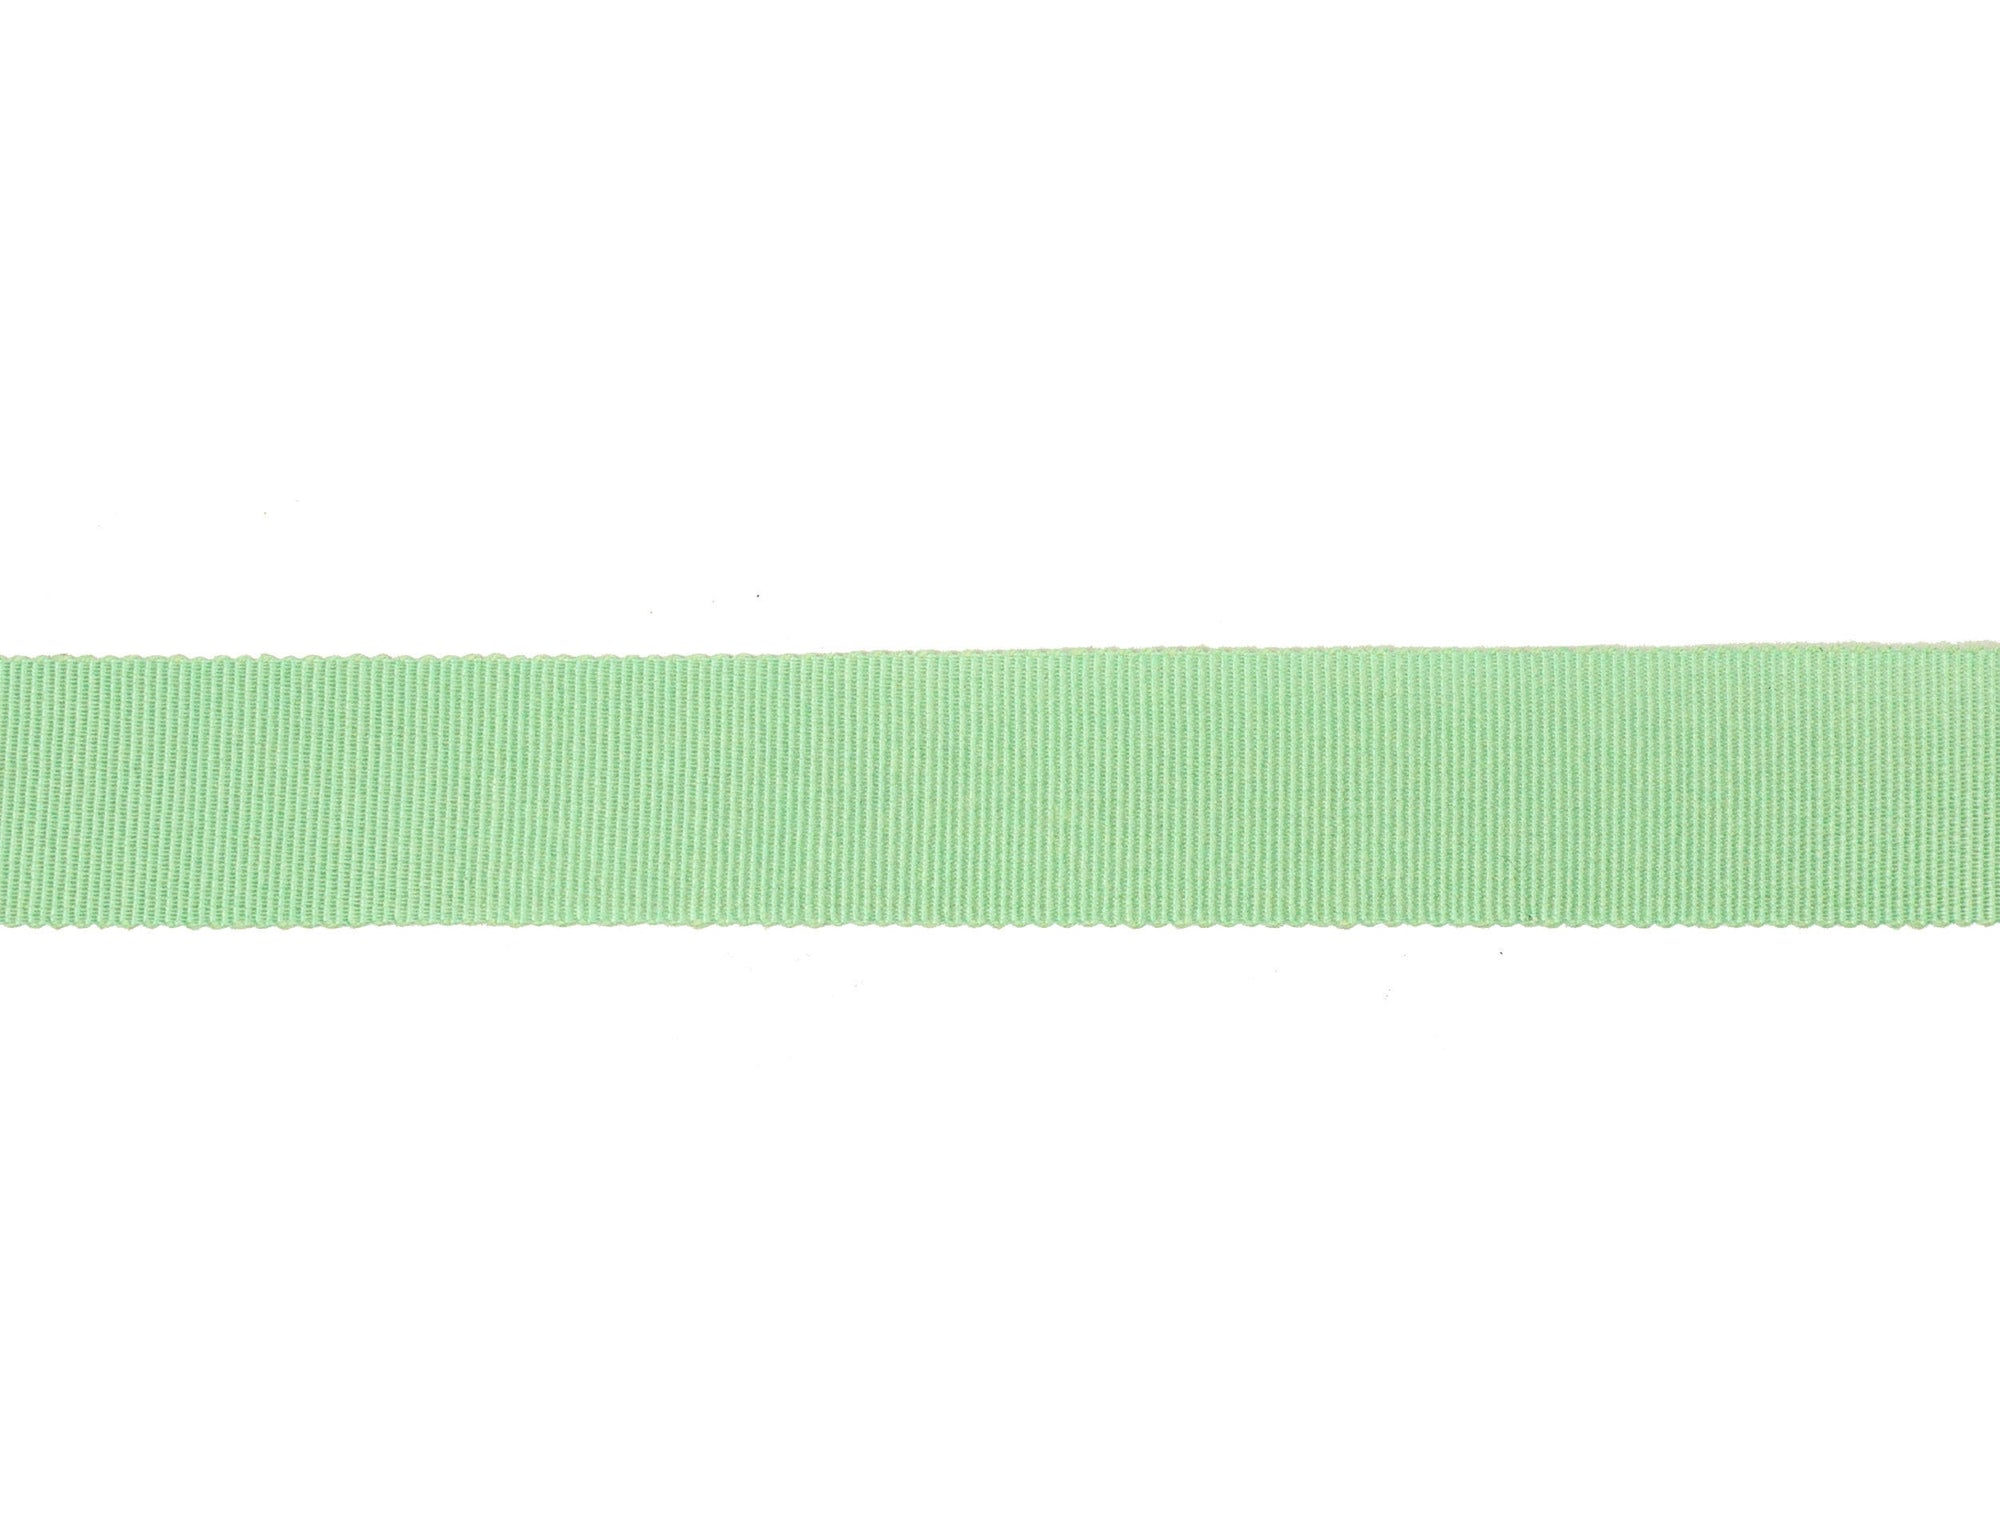 Vintage Ribbon Petersham 50/50 Cotton Rayon 23 mm Wide - Sea Green - Sold by the Yard - Humboldt Haberdashery